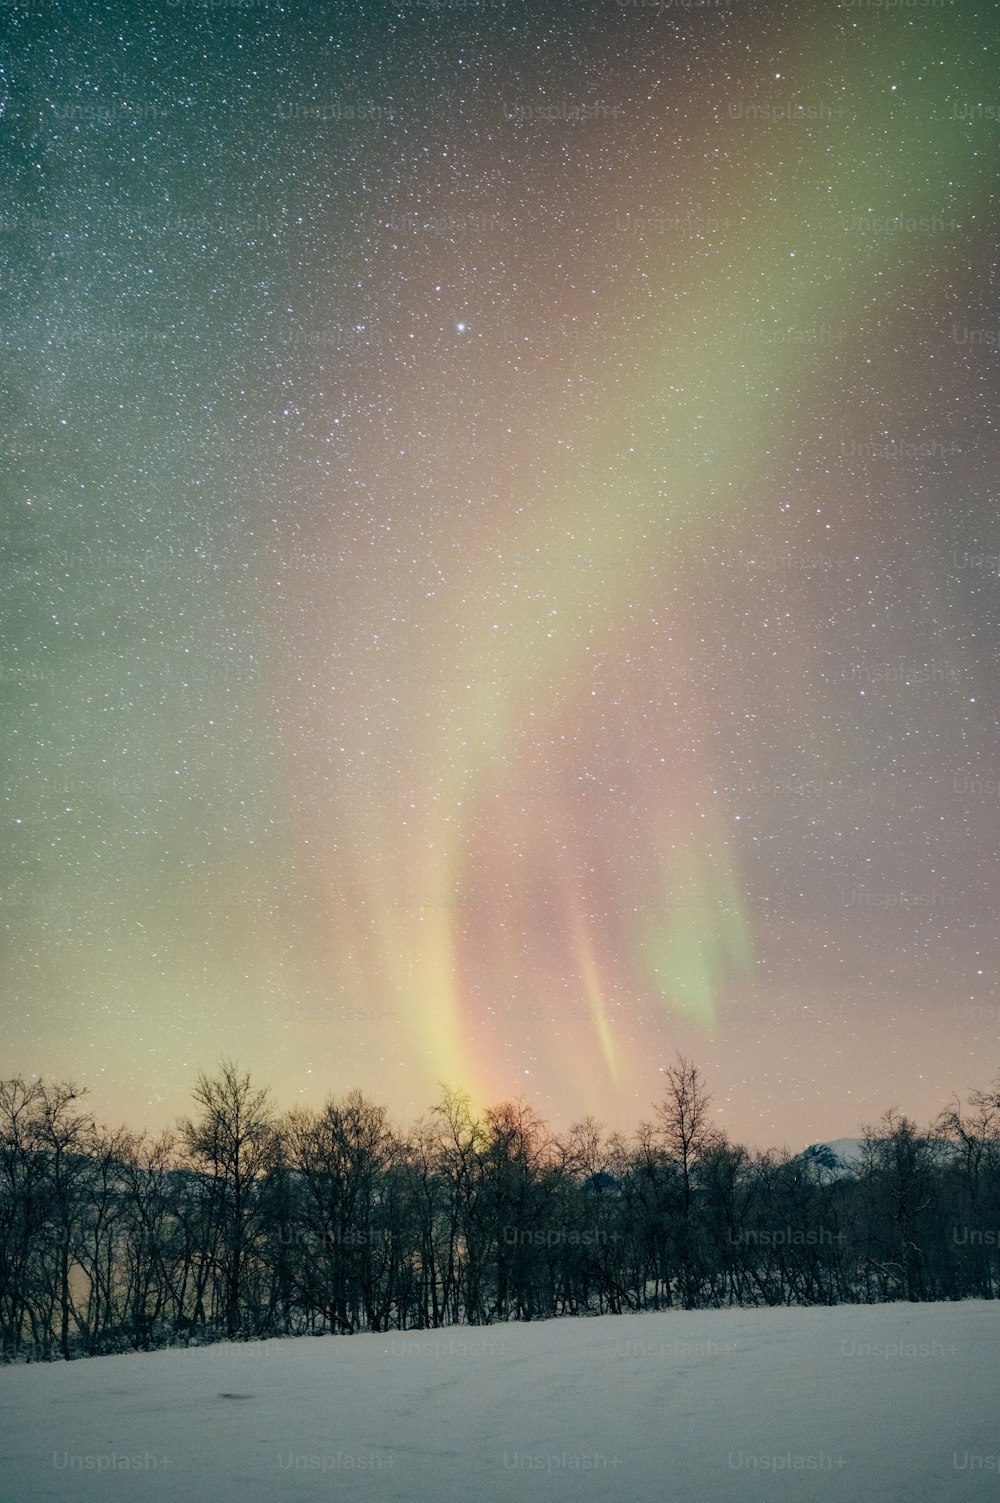 the aurora bore in the sky over a snow covered field